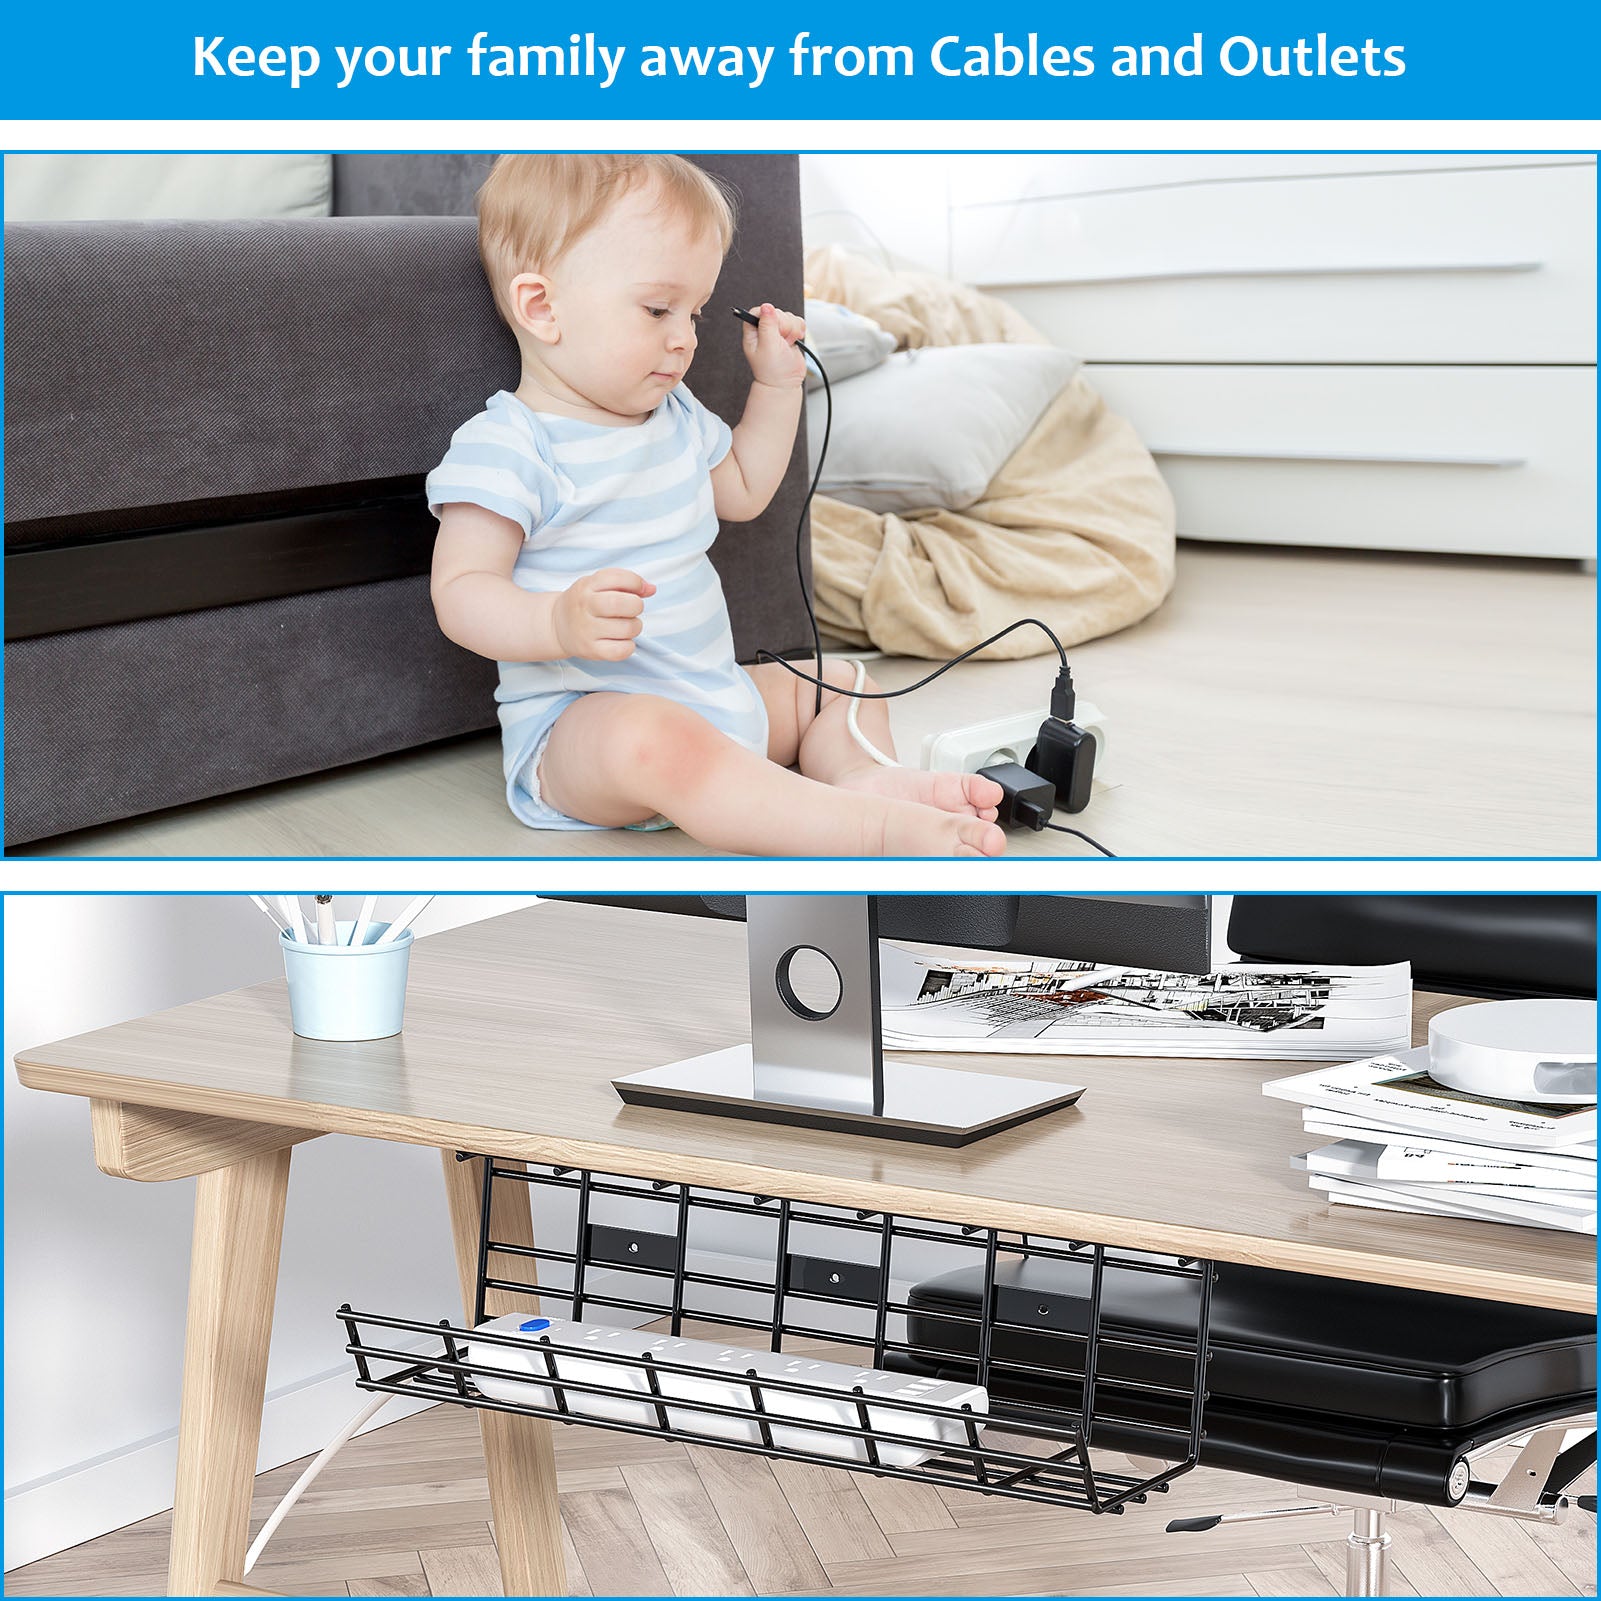 Cable organizers (set of 2) for your desk